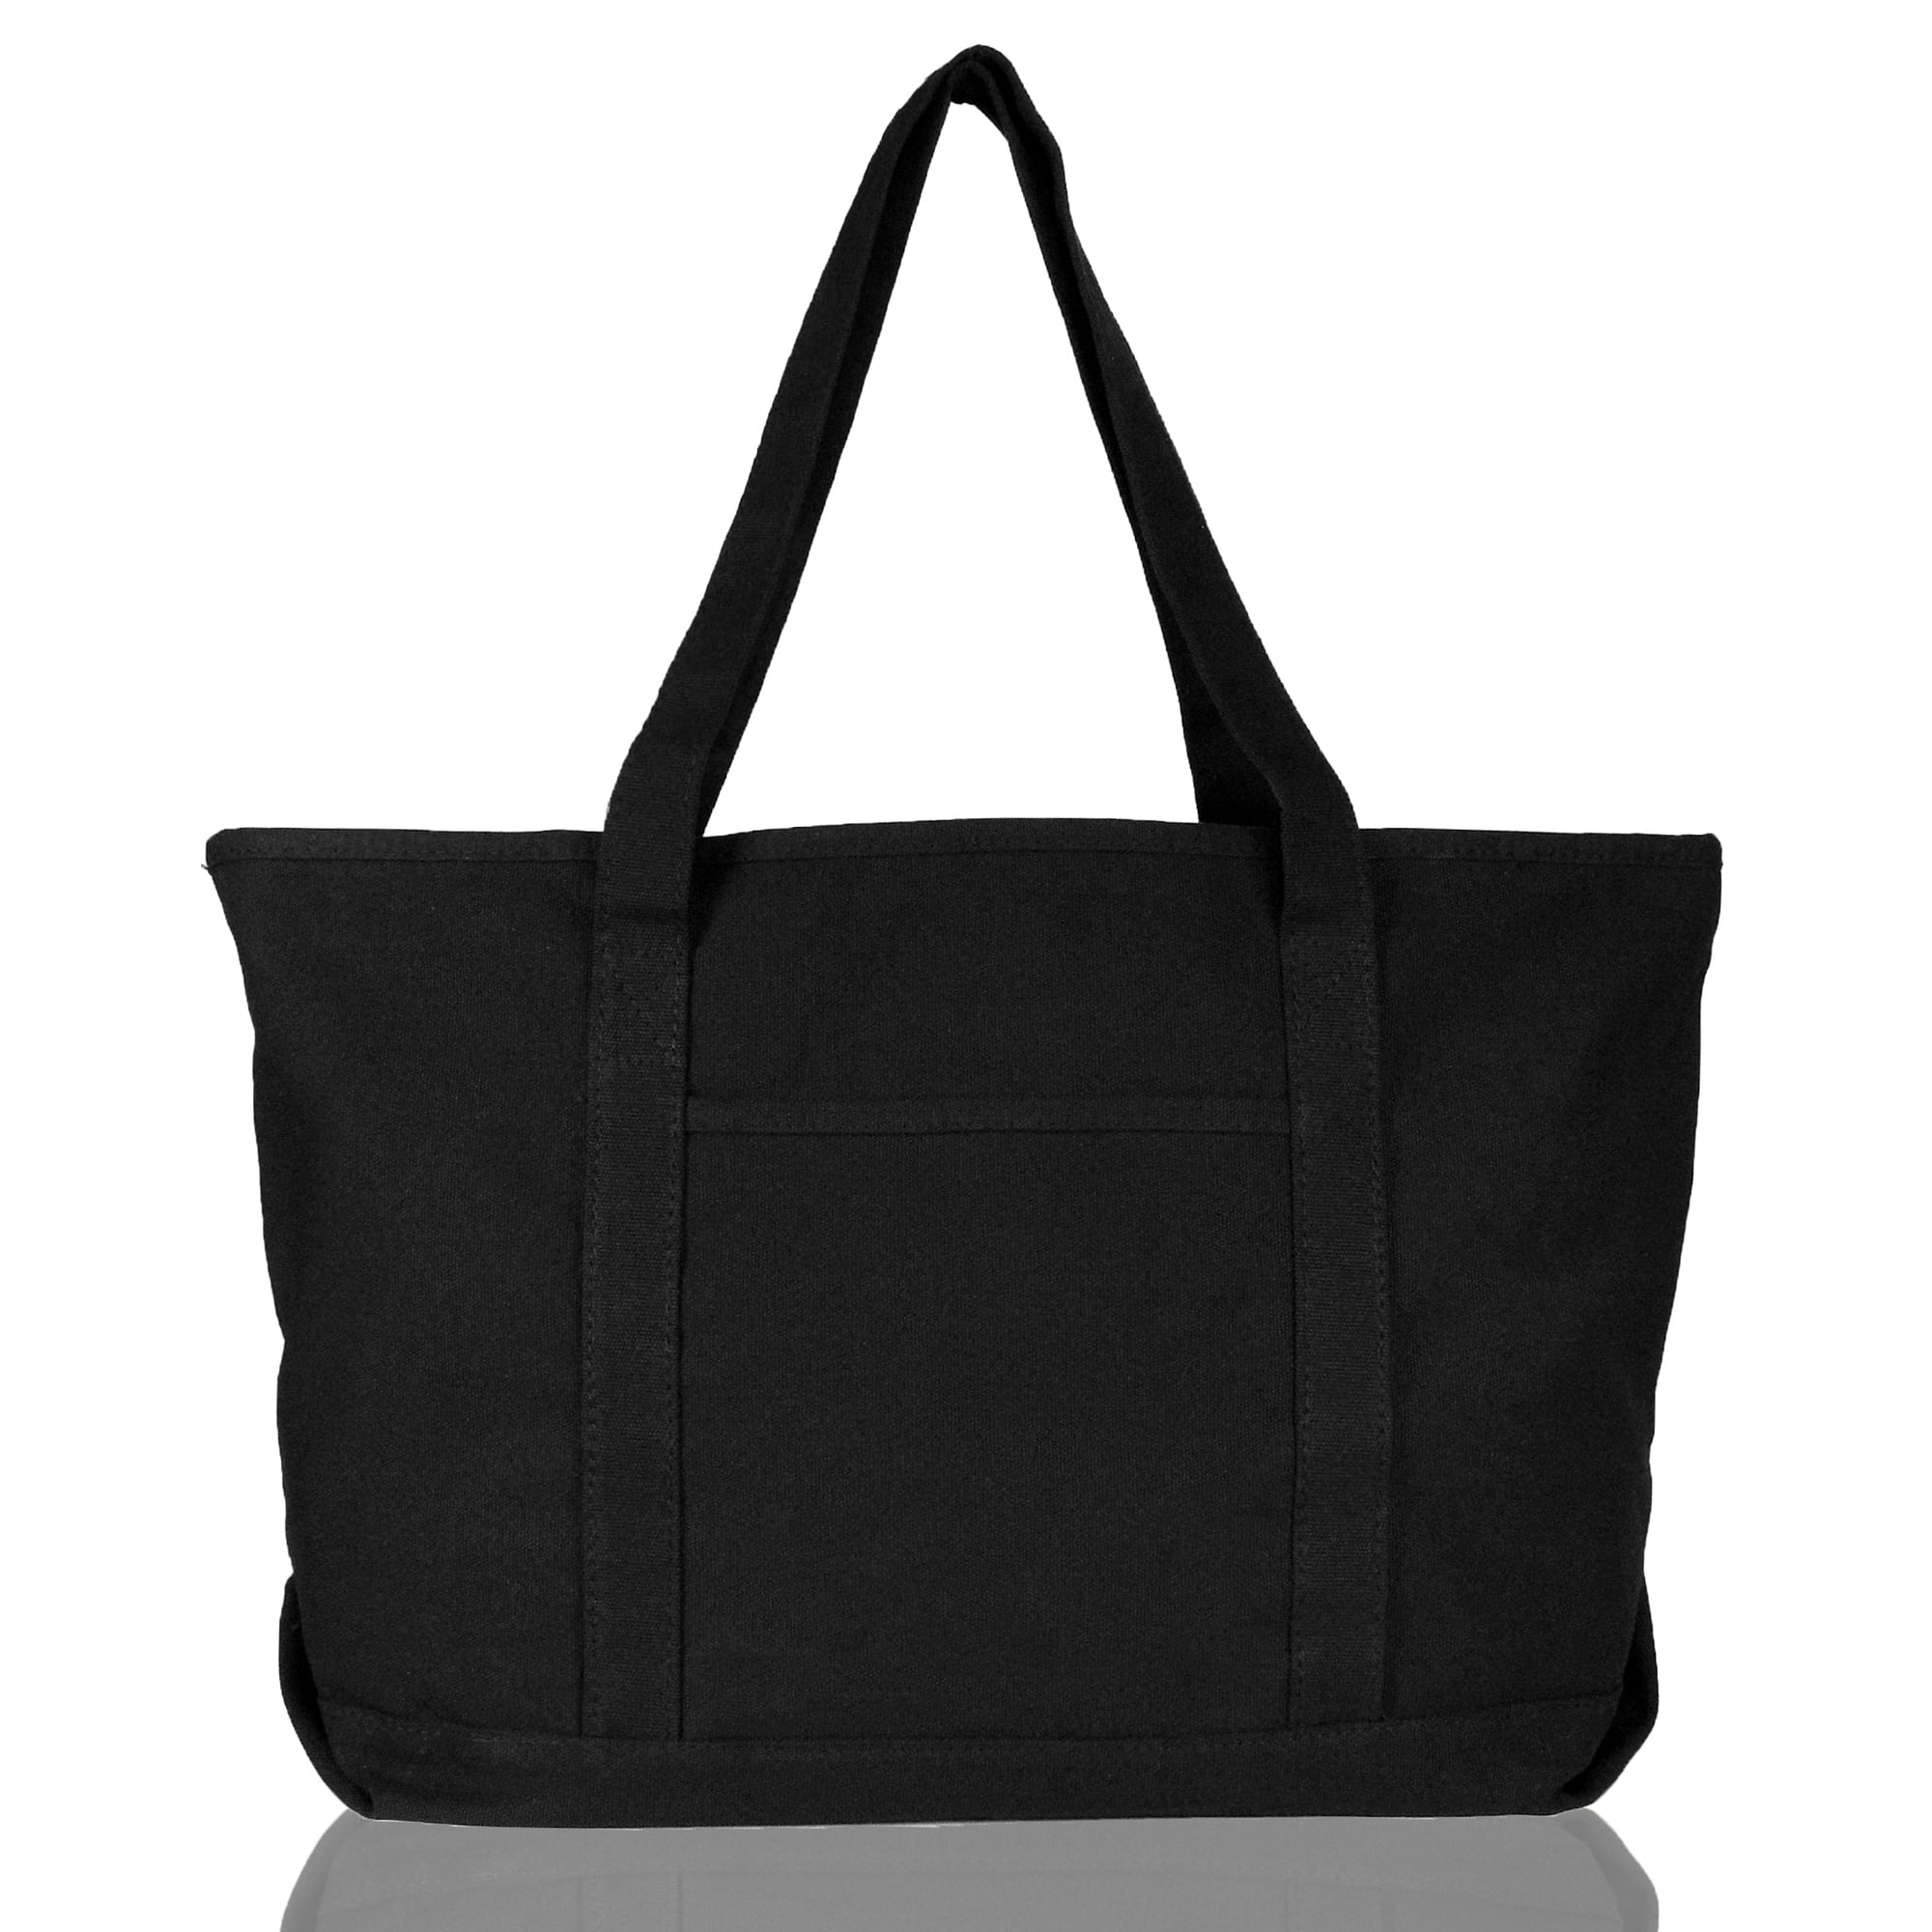 Newest and best here Buy Now Guaranteed Satisfied Quality Tote ...